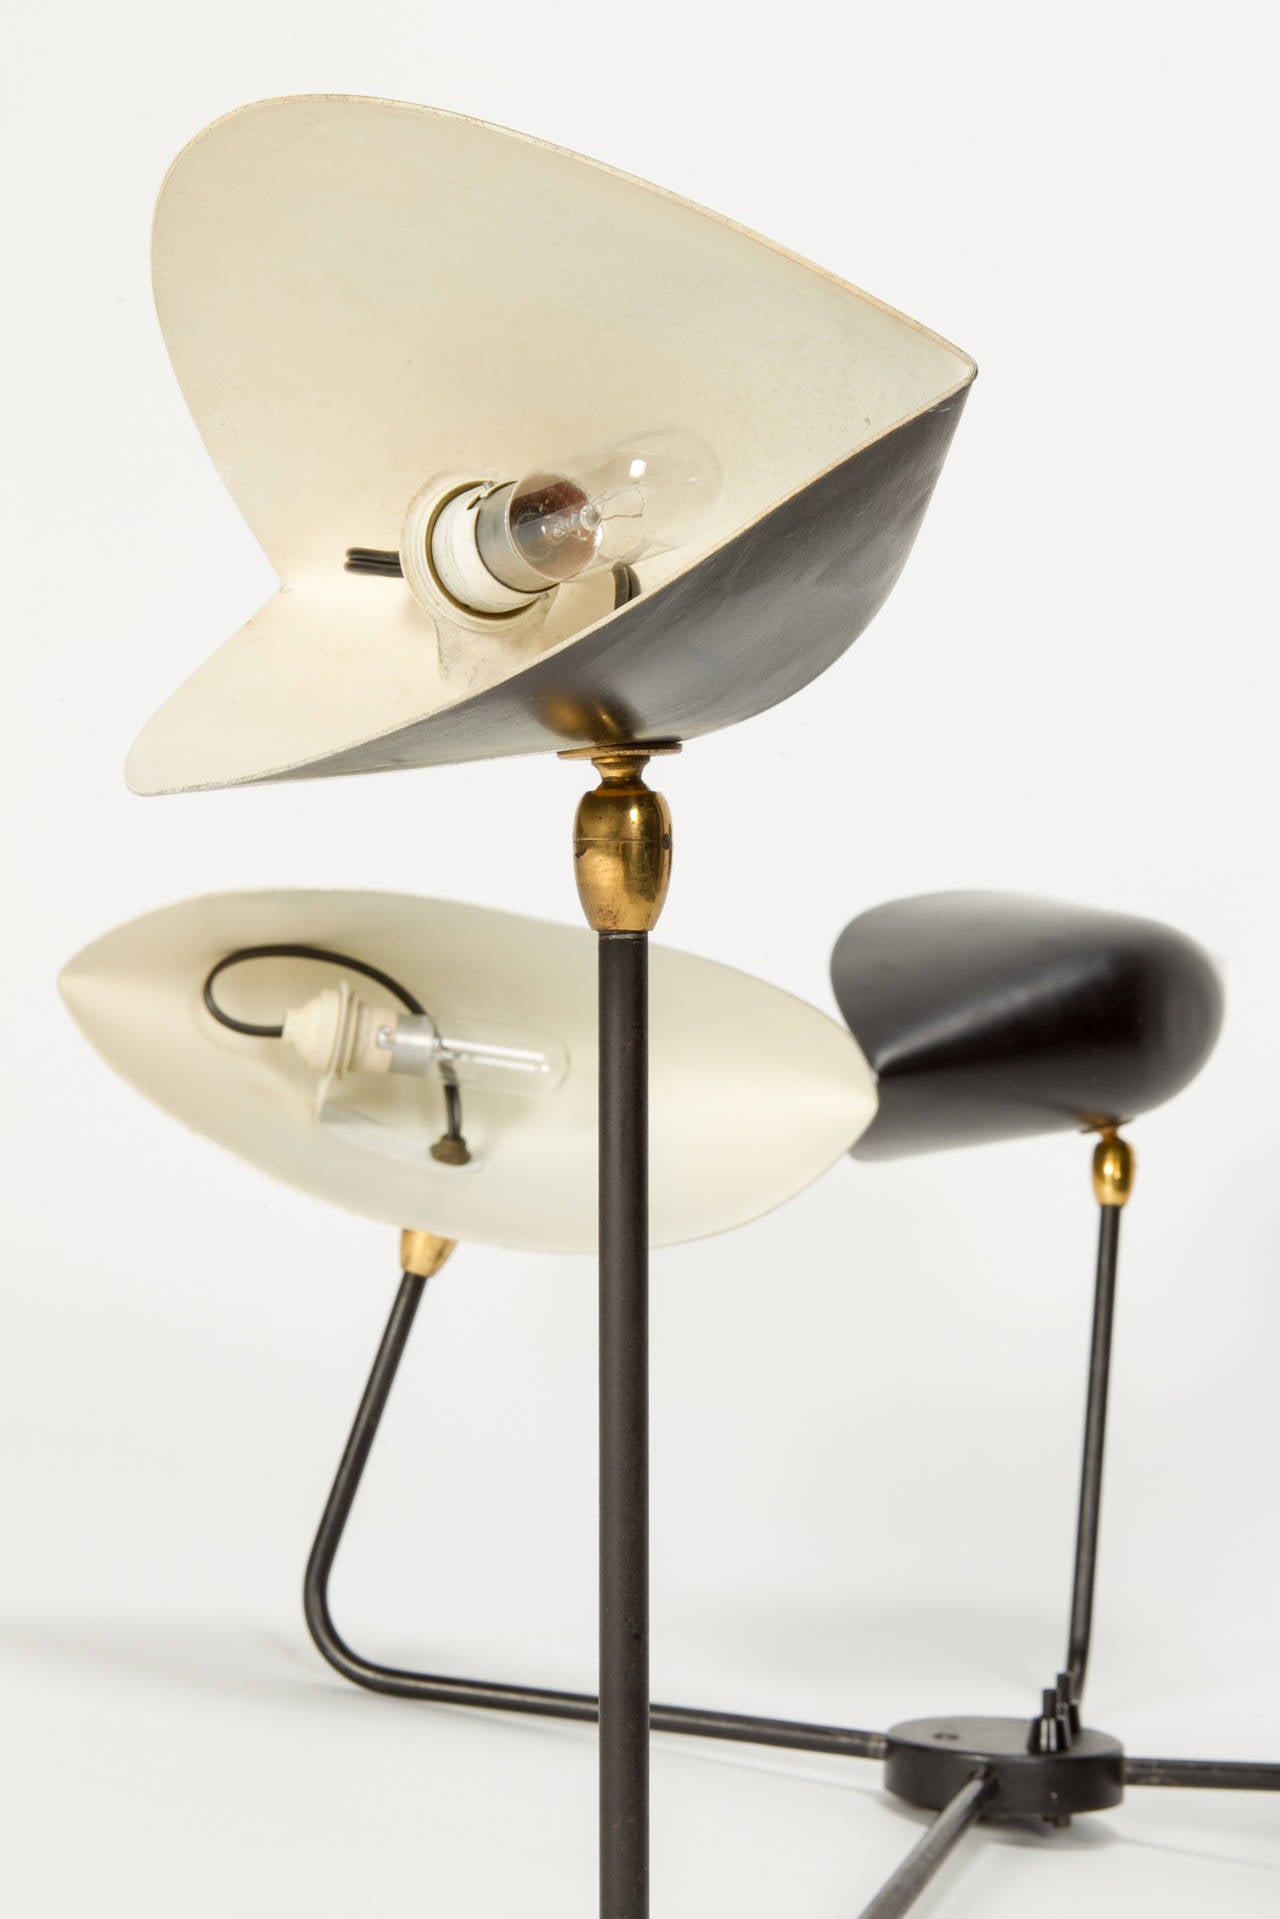 French Serge Mouille Four-Arm Wall Lamp from the 1950s